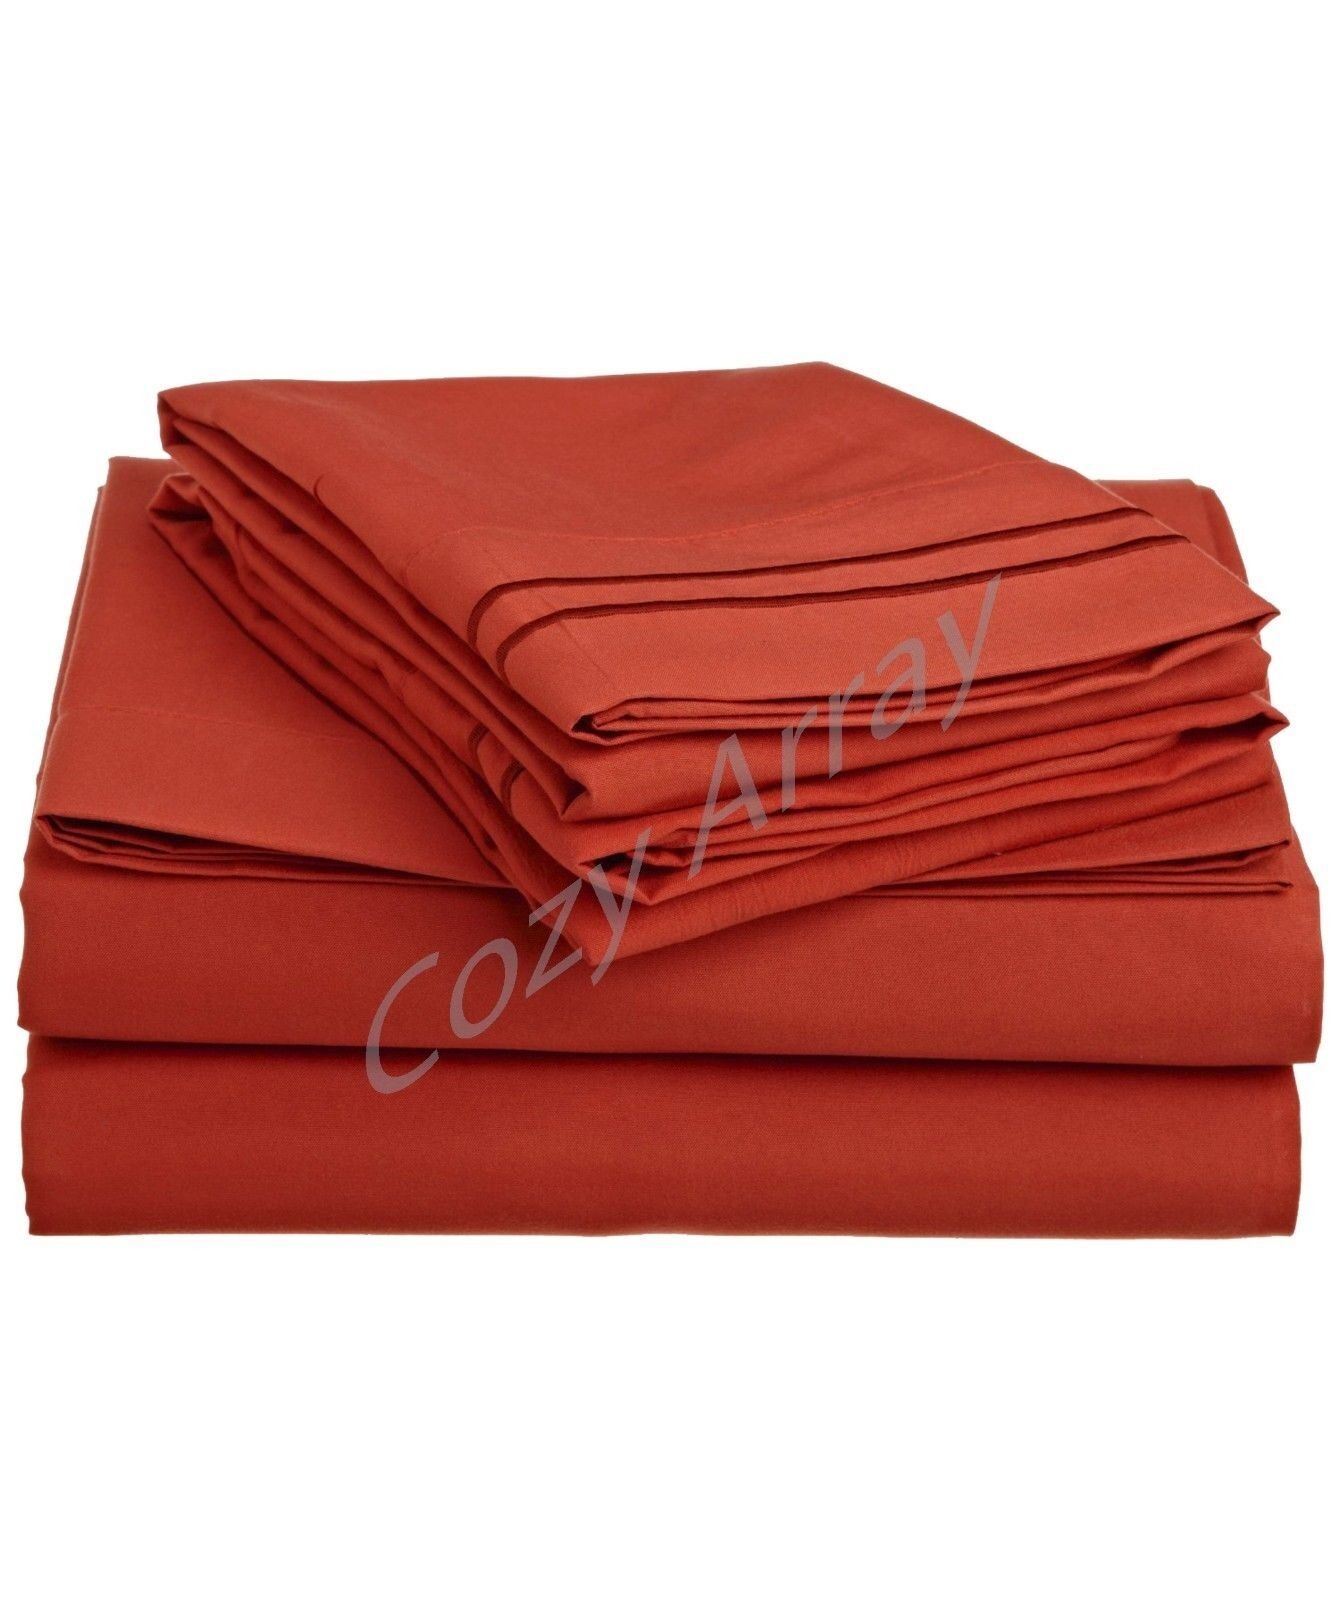 Bed Sheets - Deep Pocket Bed Sheets- 4 Piece Set, Queen, King, Twin, or Full Size - Full / Terracotta